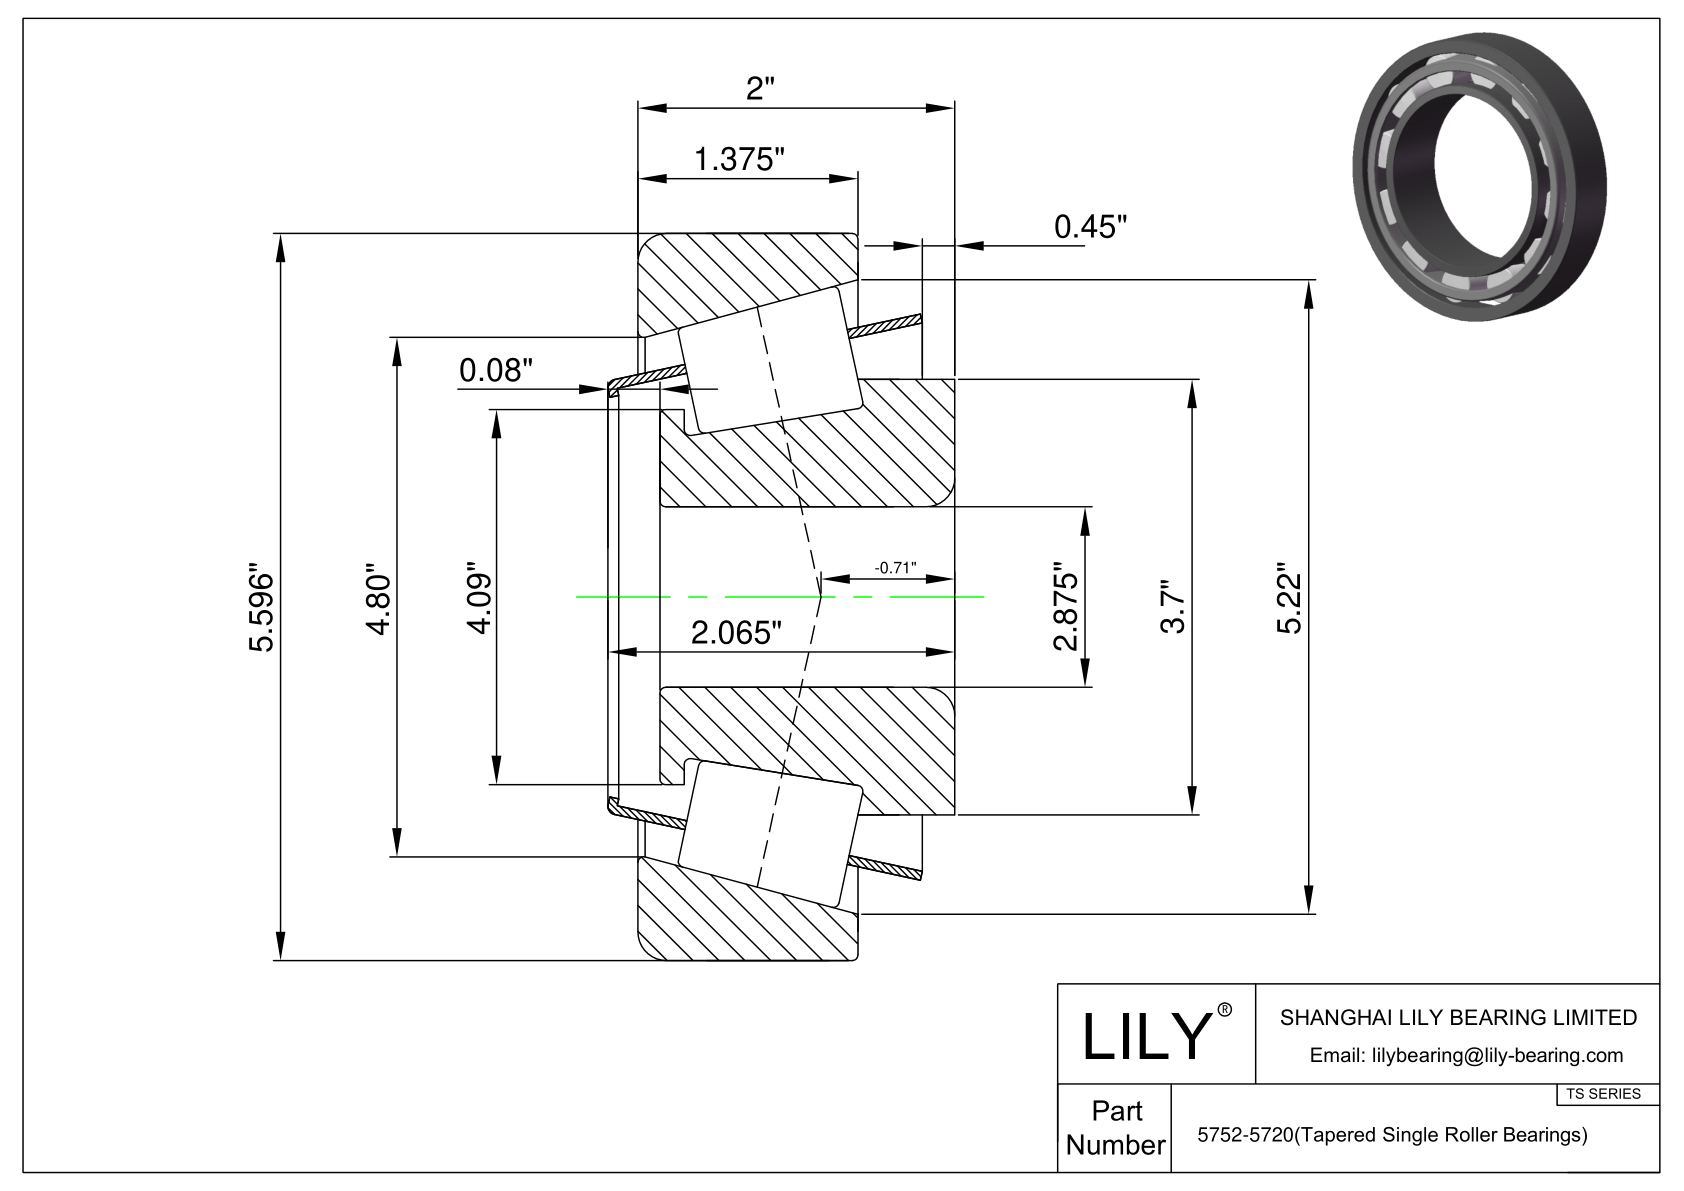 5752-5720 TS (Tapered Single Roller Bearings) (Imperial) cad drawing